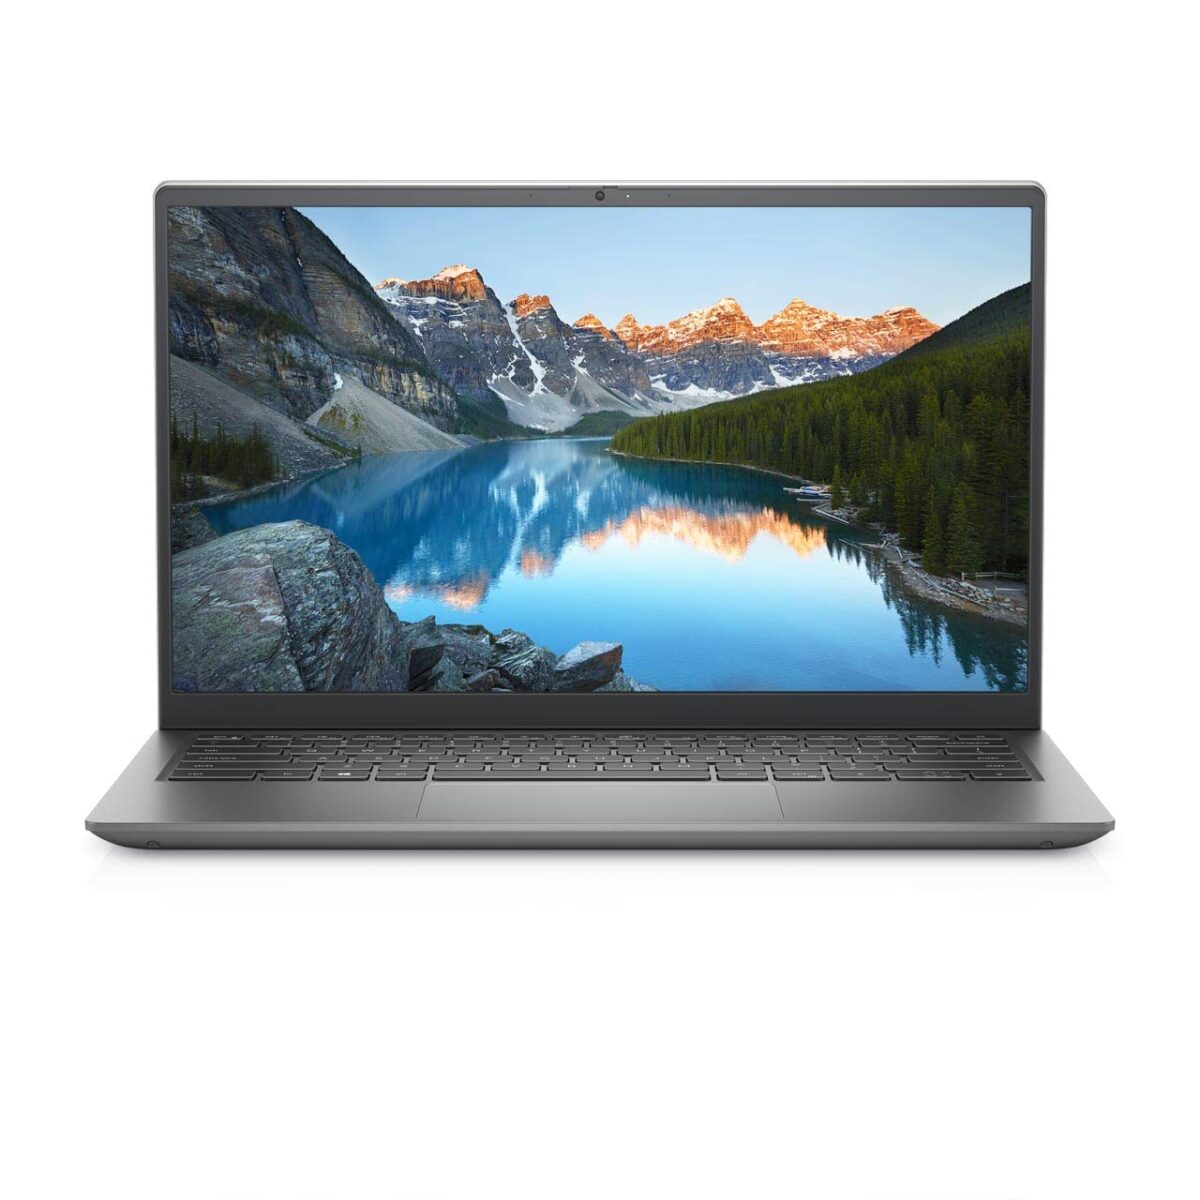 Dell Inspiron 5415 ICC-C782517WIN8 Laptop Launched in India ( AMD Ryzen 7 5700 / 16GB / 512GB SSD )